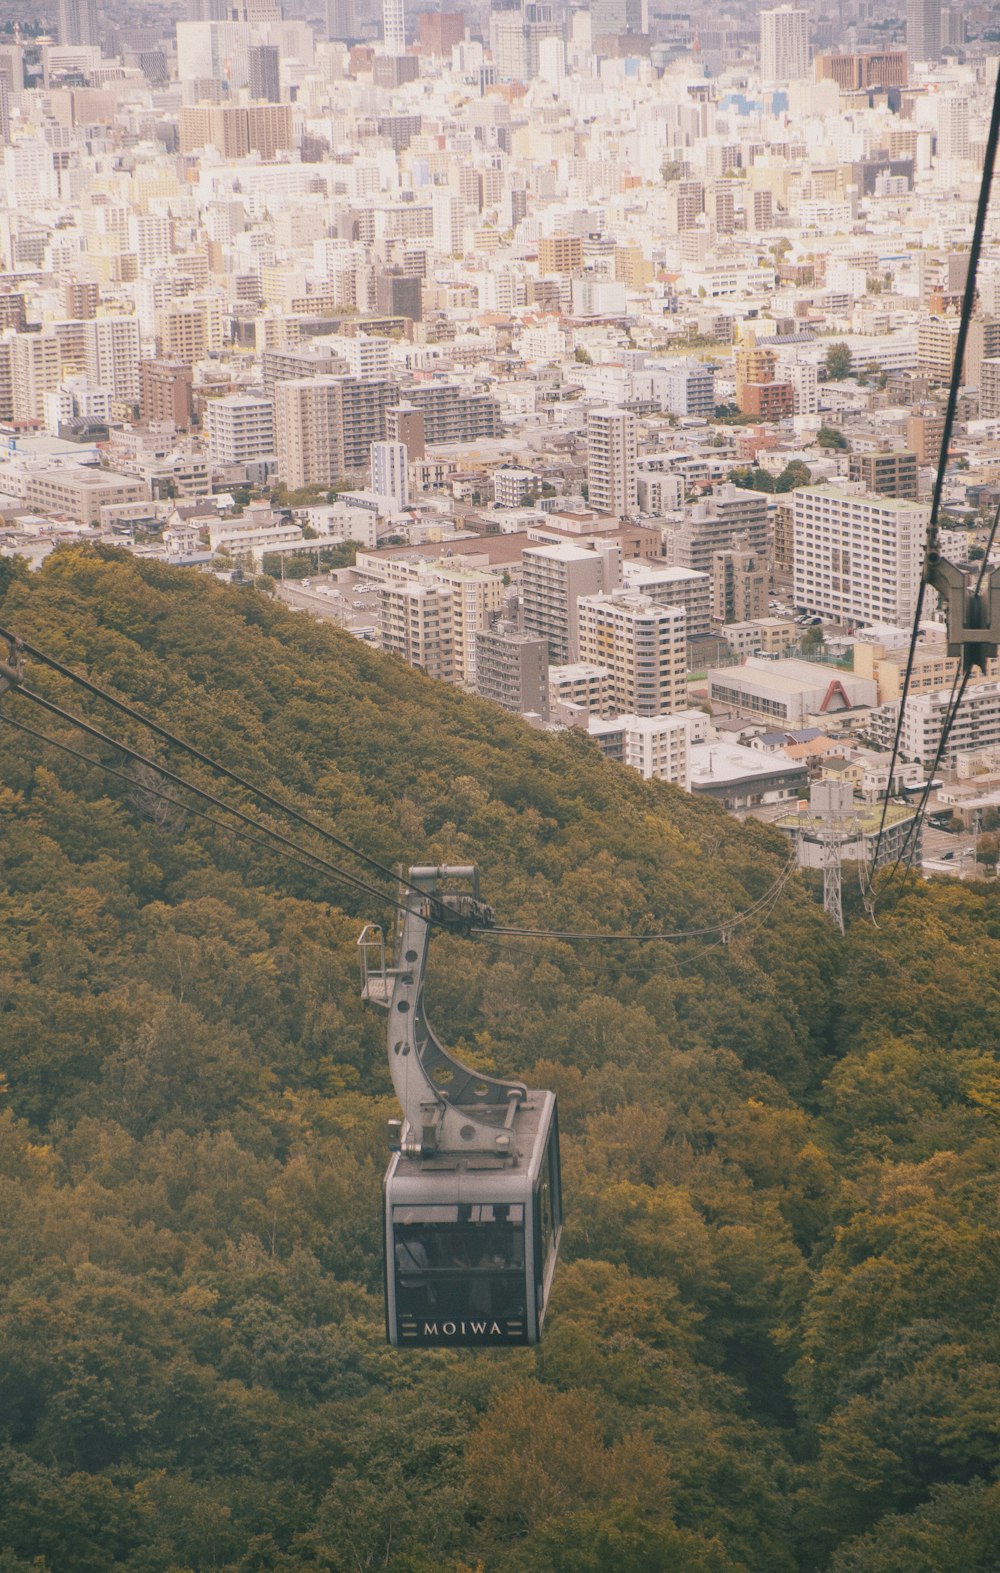 a cable car going up a hill with a city in the background